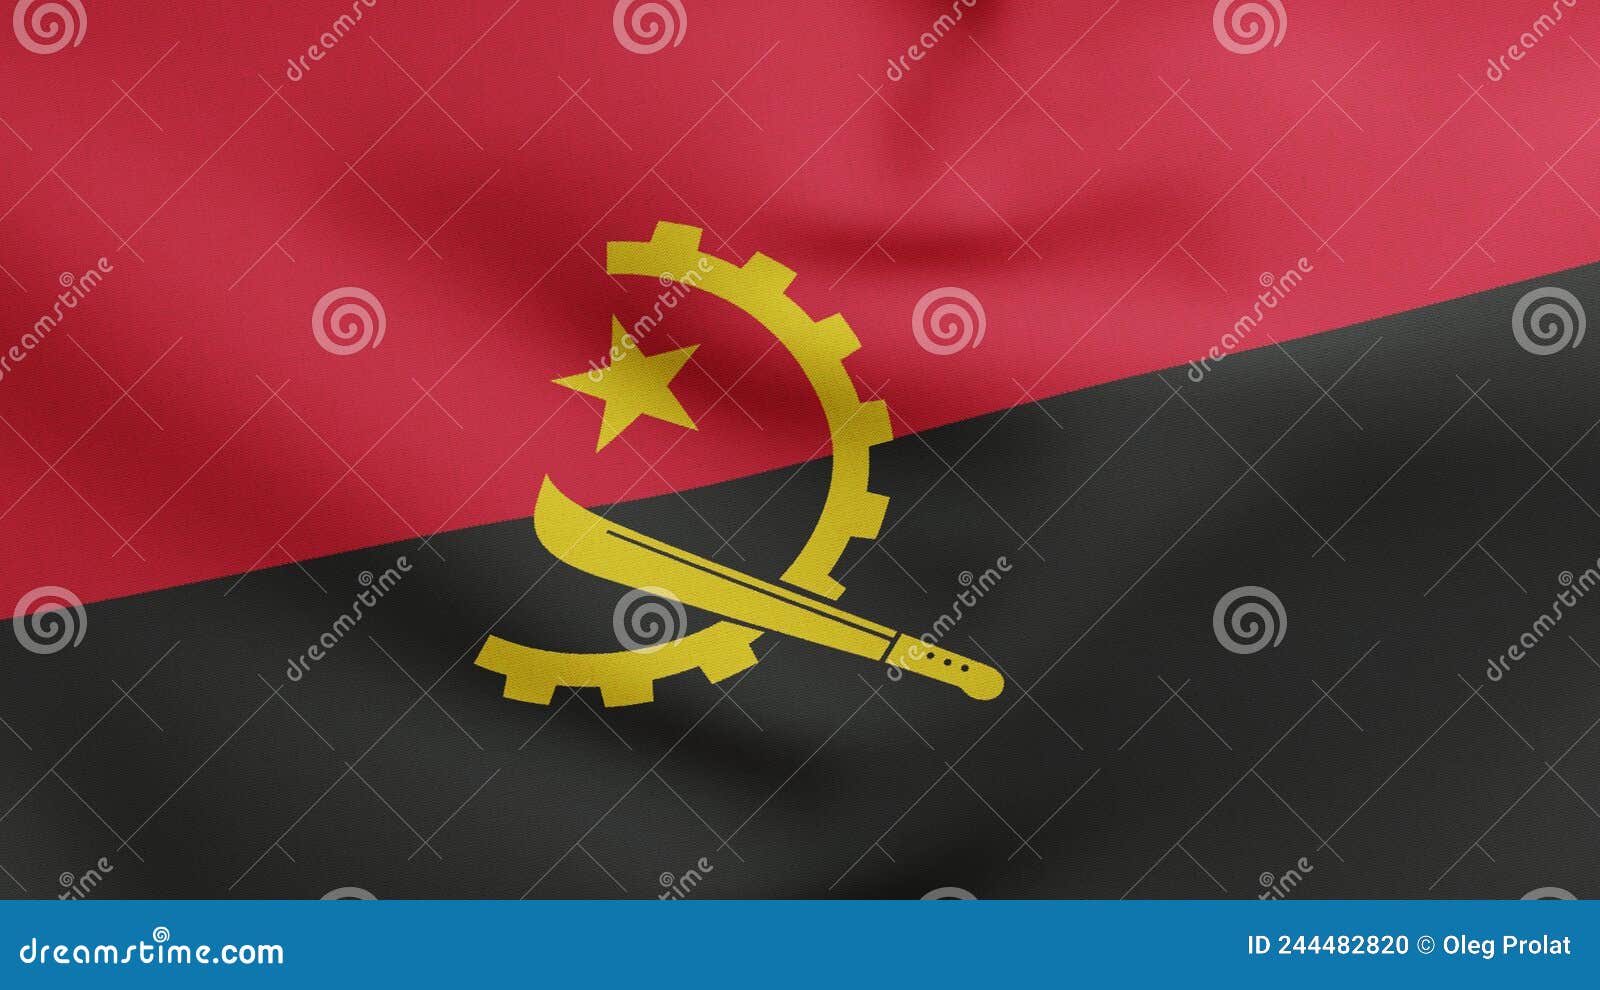 national flag of angola waving 3d render, republic of angola flag textile, popular movement for the liberation of angola